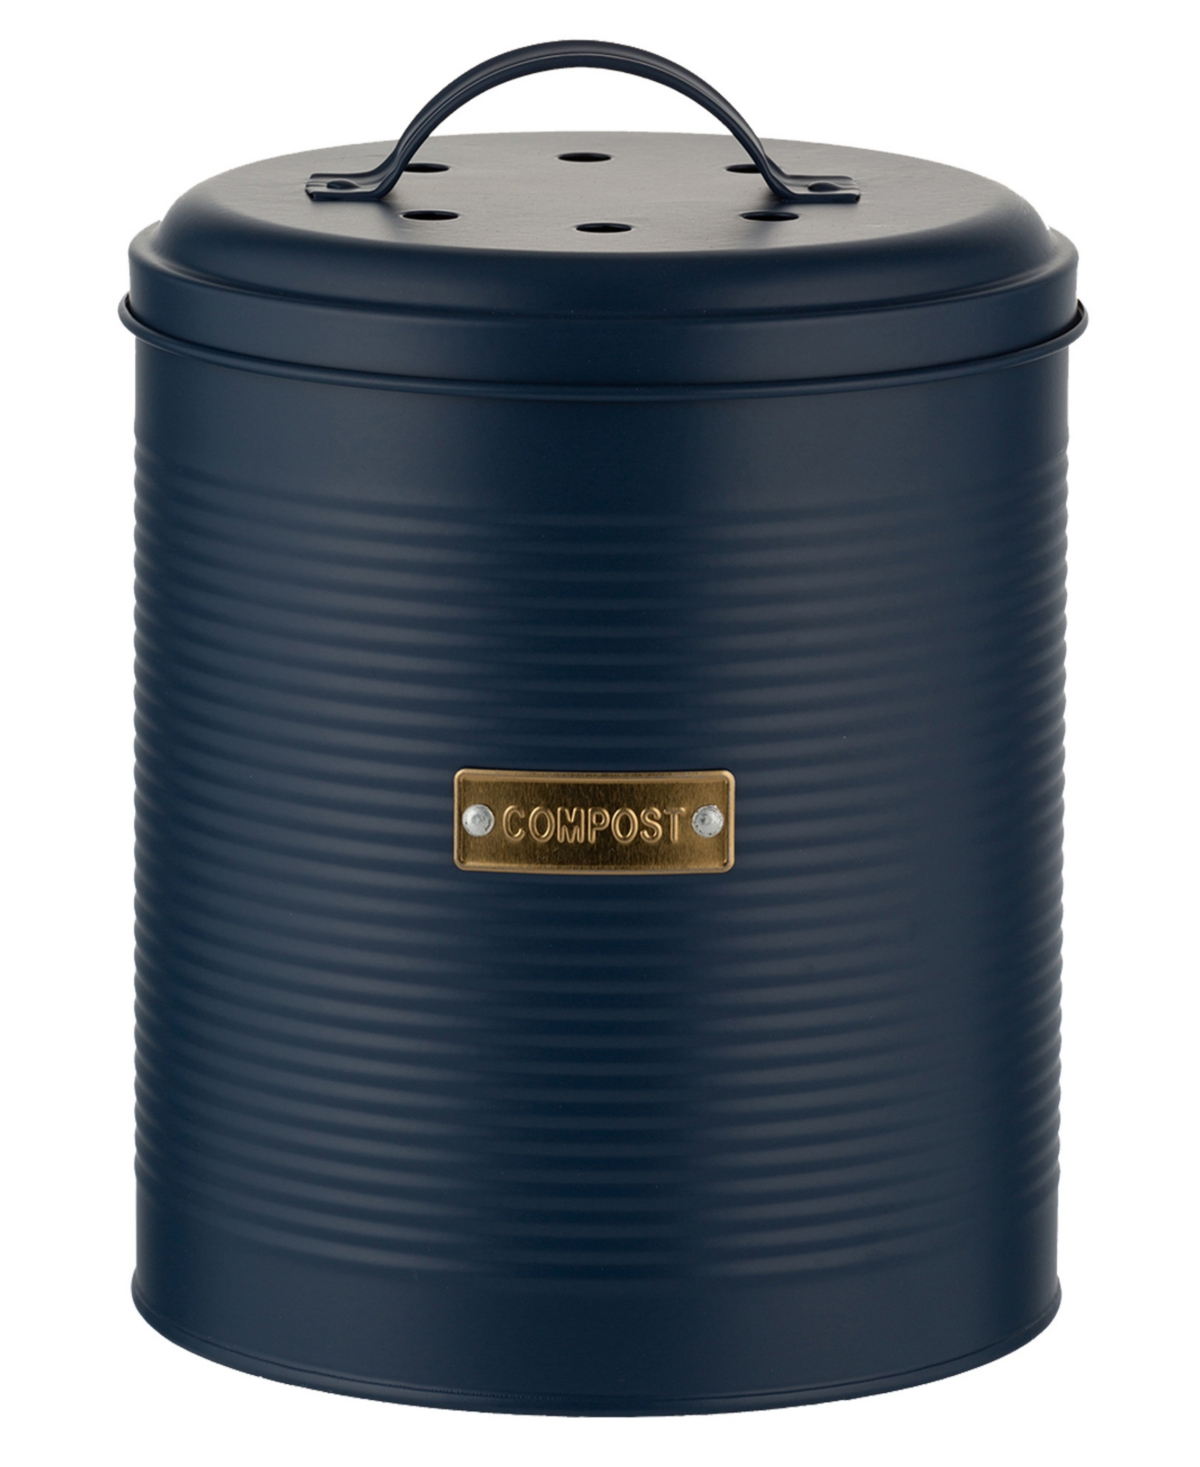 Typhoon Otto Compost Caddy, 7.87" In Navy